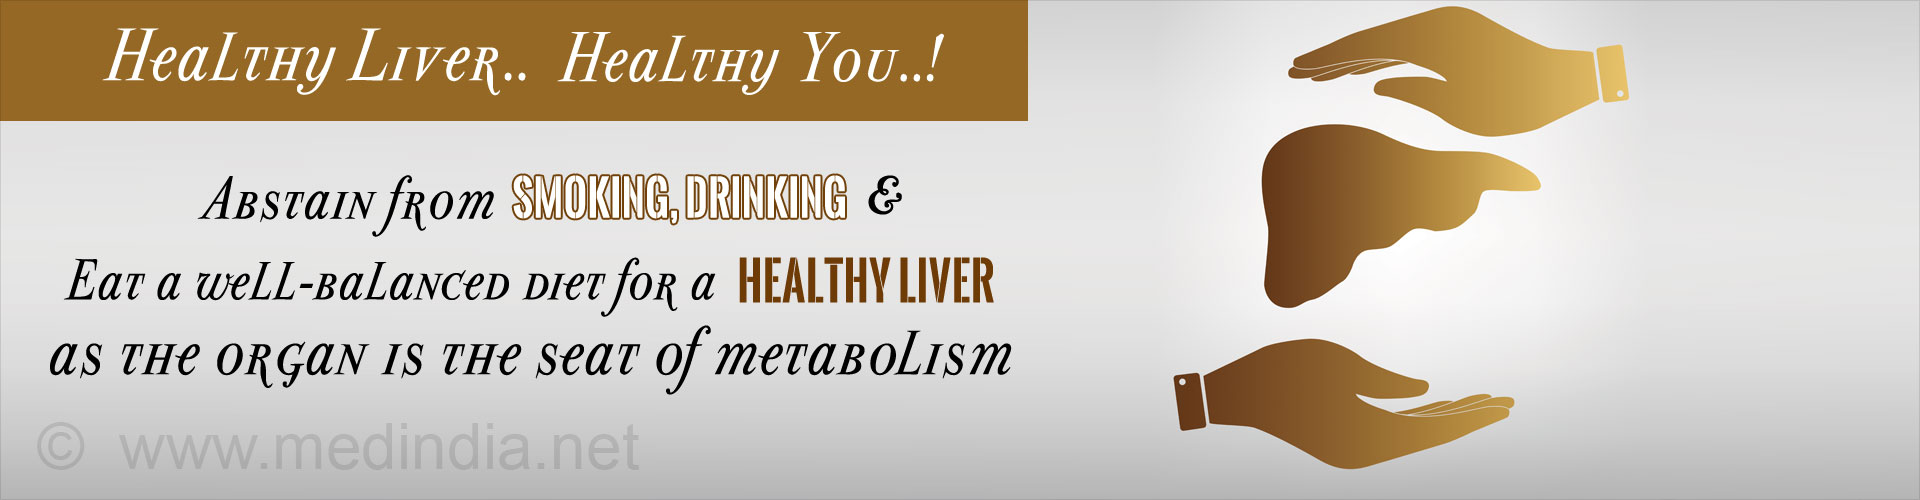 Abstain From Smoking, Drinking and Eat a Well Balanced Diet for a Healthy Liver